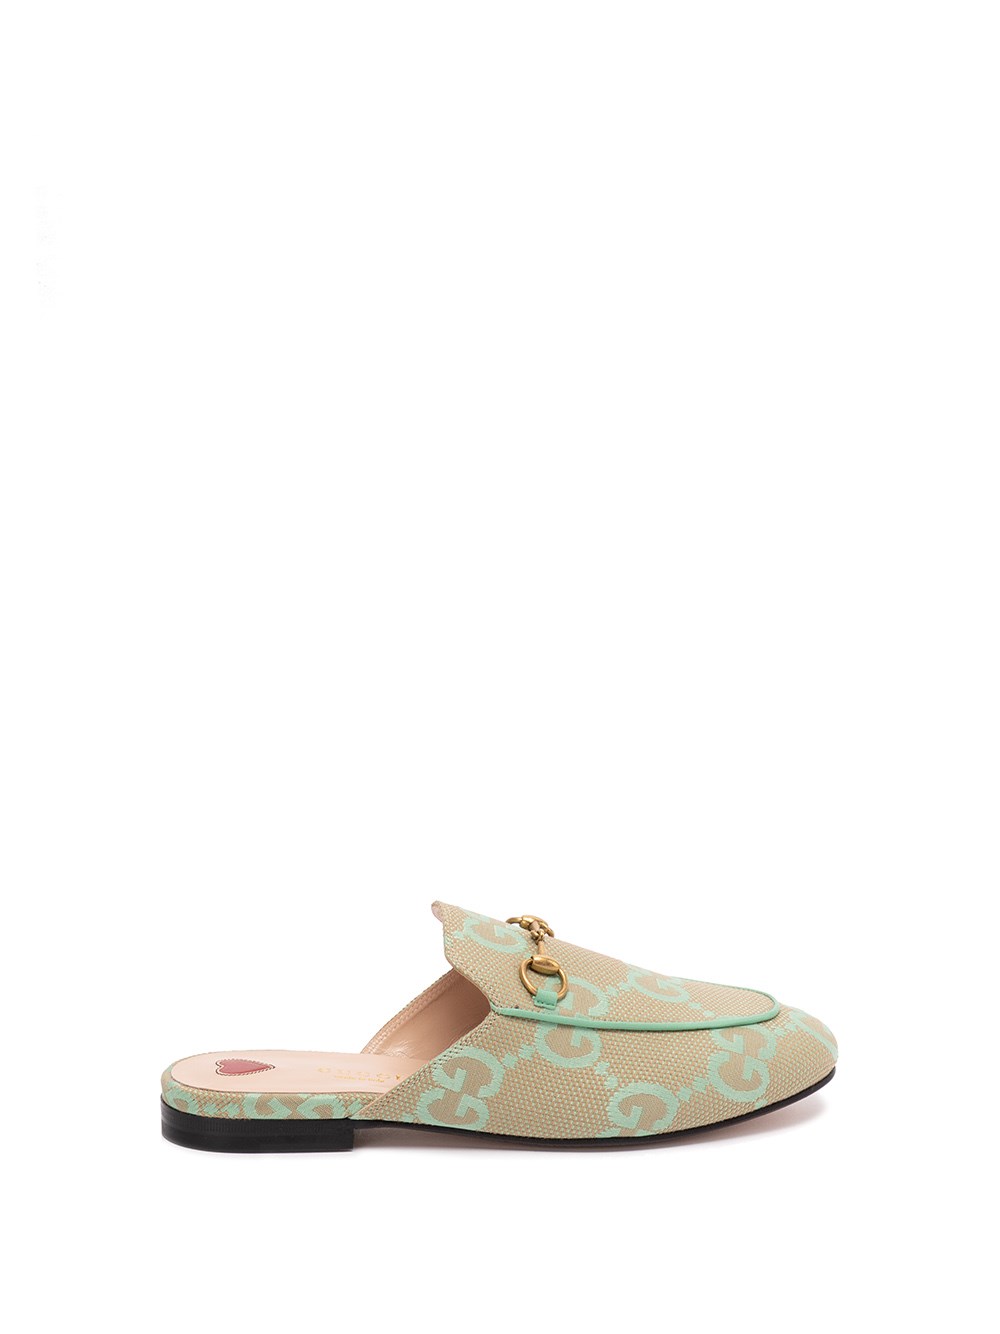 GUCCI `GG PRINCETOWN` SLIPPERS